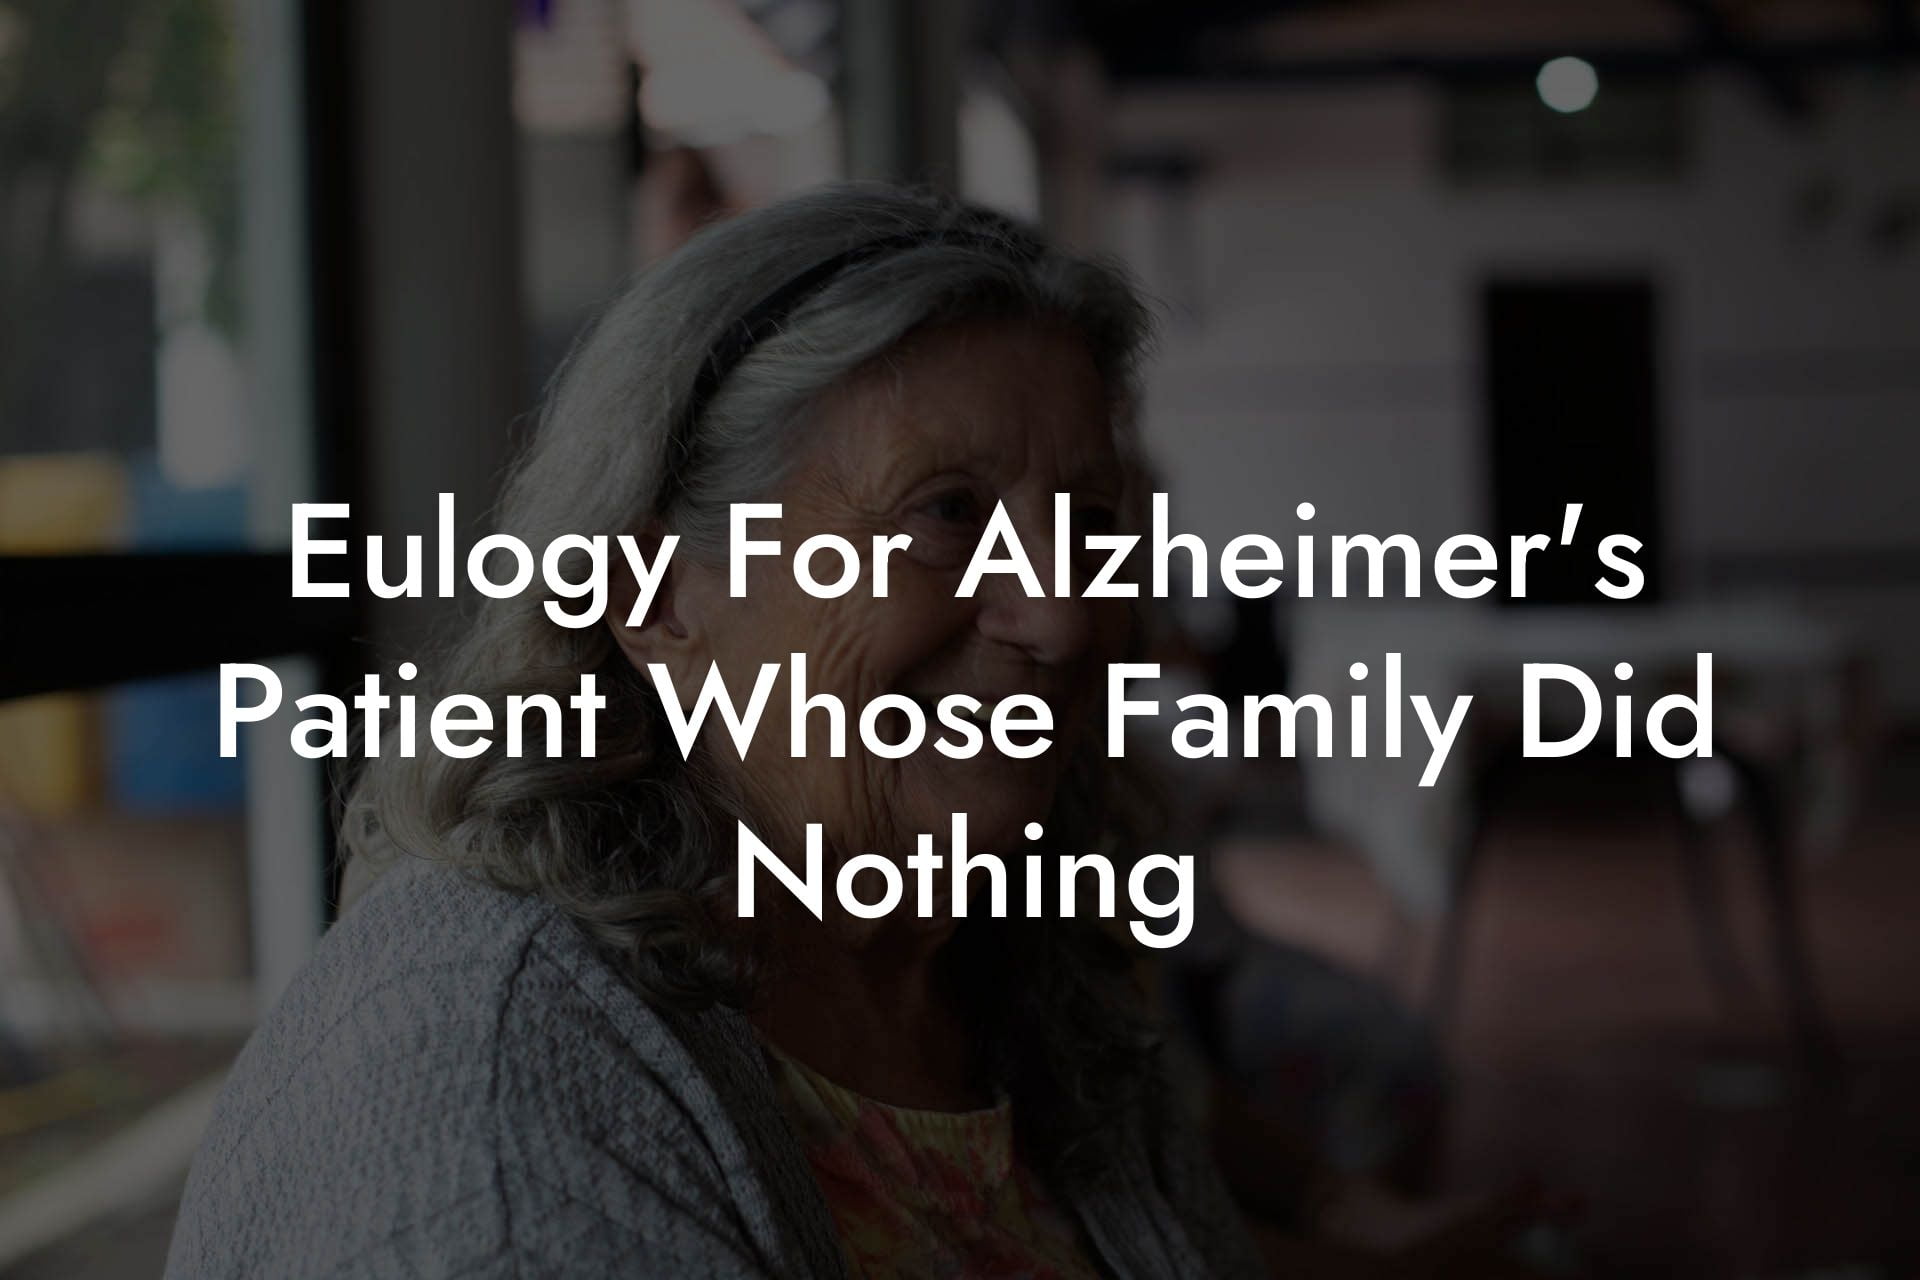 Eulogy For Alzheimer's Patient Whose Family Did Nothing